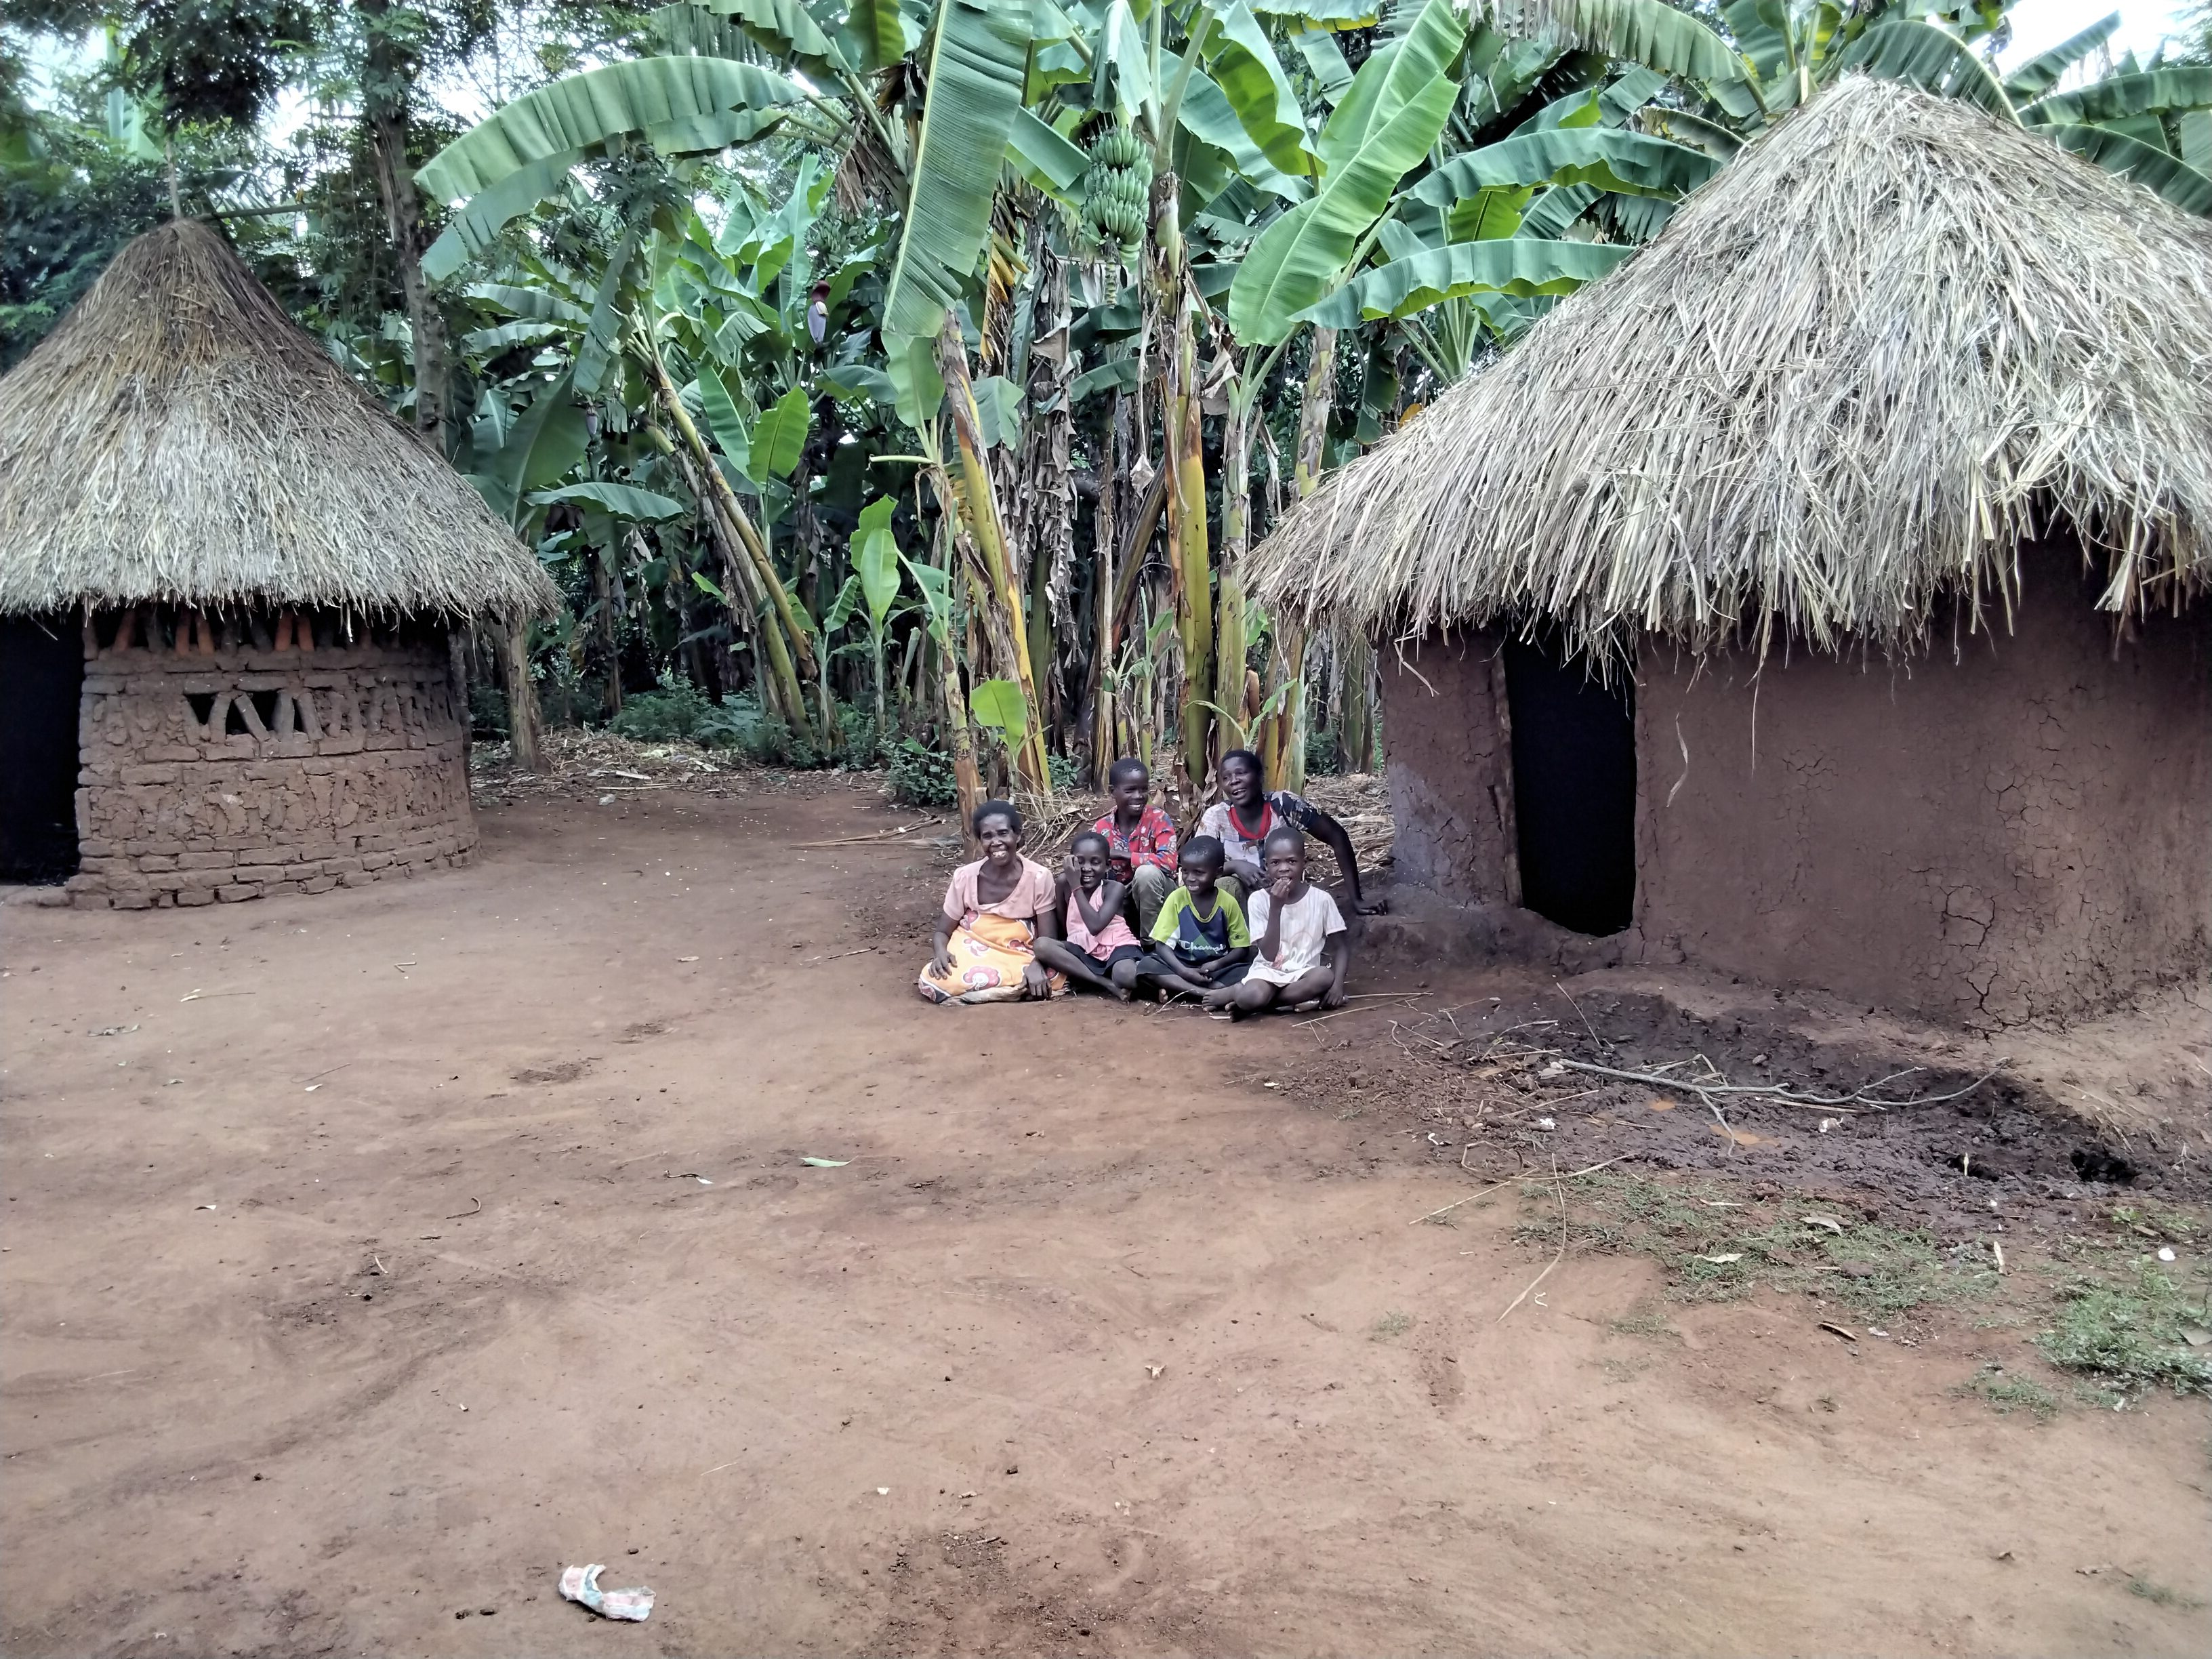 A woman and her family by their home in Uganda